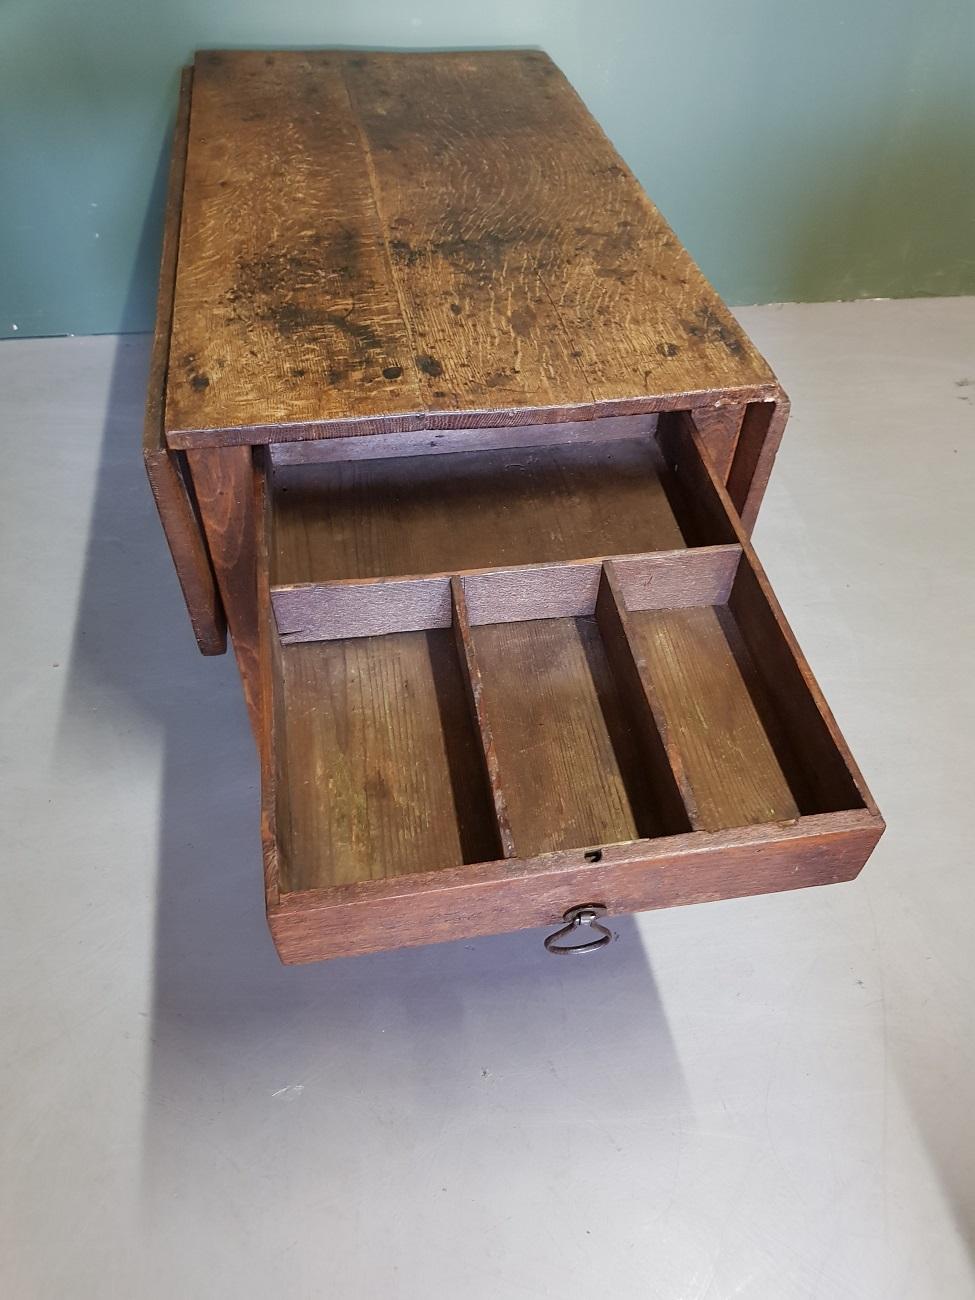 Antique Dutch oak drop-leaf table with drawer and with a very used top that is resulting in a beautiful patina, 19th century.

The measurements are,
Depth 89 cm/ 35 inch.
Width 47-92 cm/ 18.5 - 36.2 inch.
Height 42 cm/ 16.5 inch.